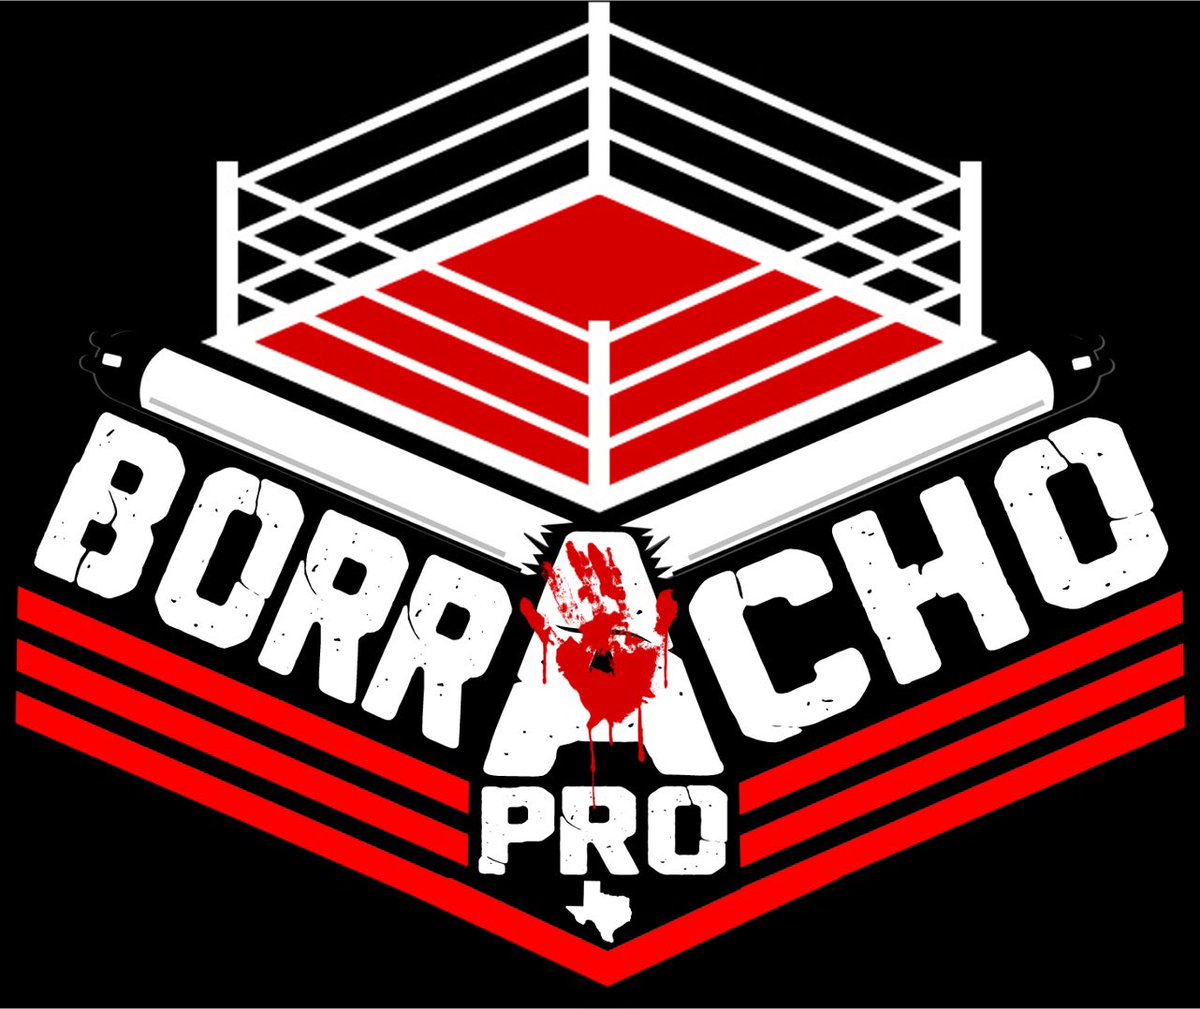 🚨BREAKING🚨 The SIXTH Promotion announced to be taking part in the Texas Indie Showcase 4 is @BorrachoProATX out of Central Texas! Borracho Pro is known for their wild, crazy and extreme Pro Wrestling Events predominantly ran out of Austin, Texas! This is the first year that